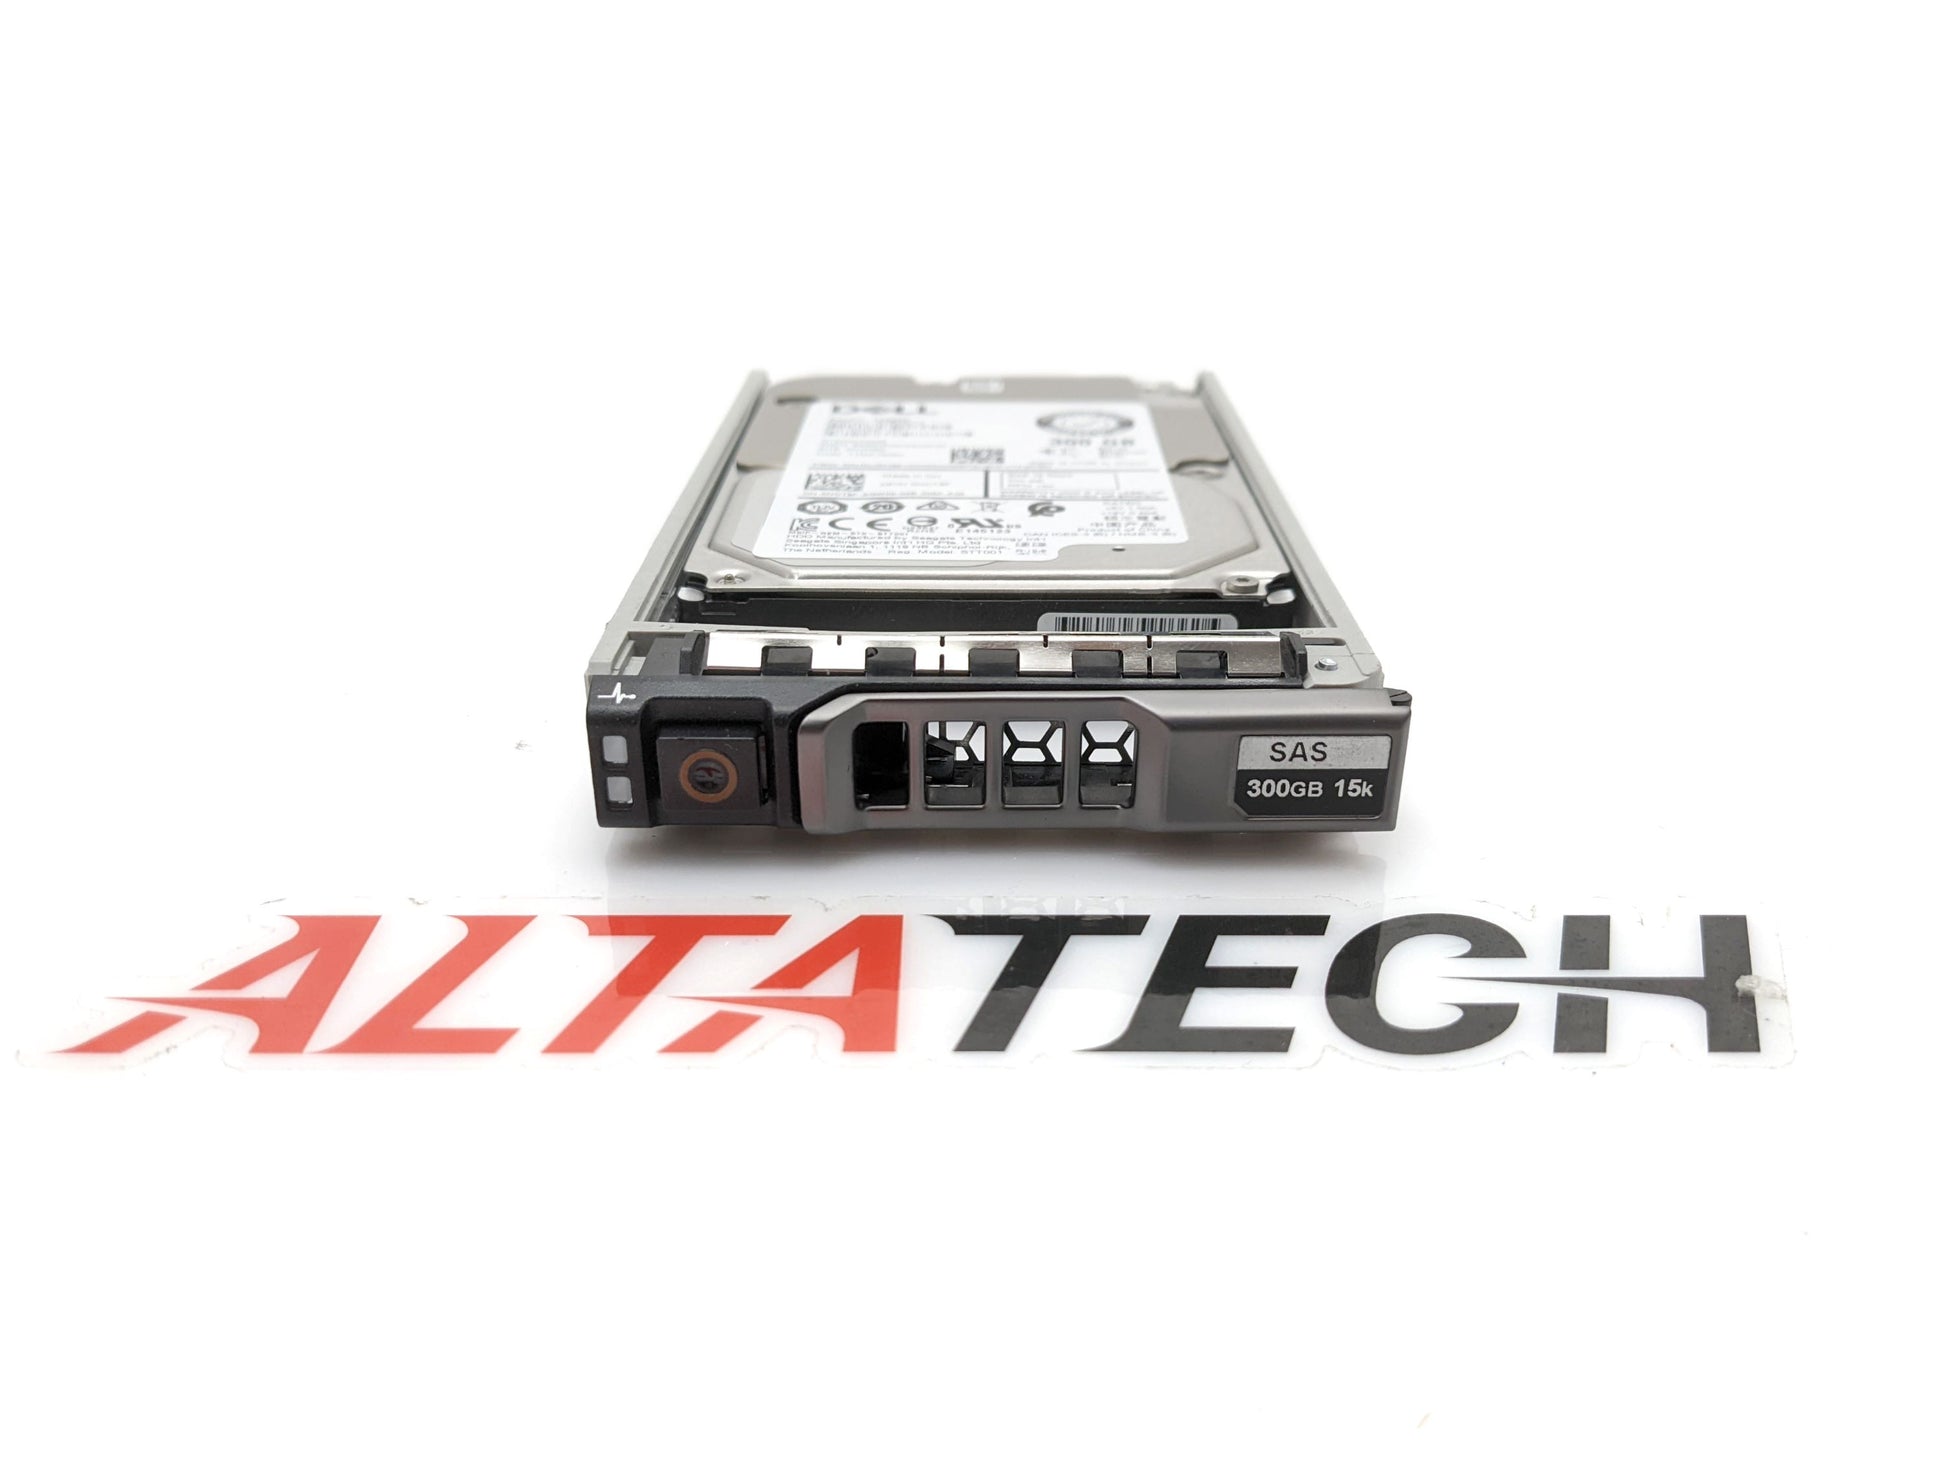 Dell 0NCT9F 300GB 15K SAS 2.5 12G HDD, Used